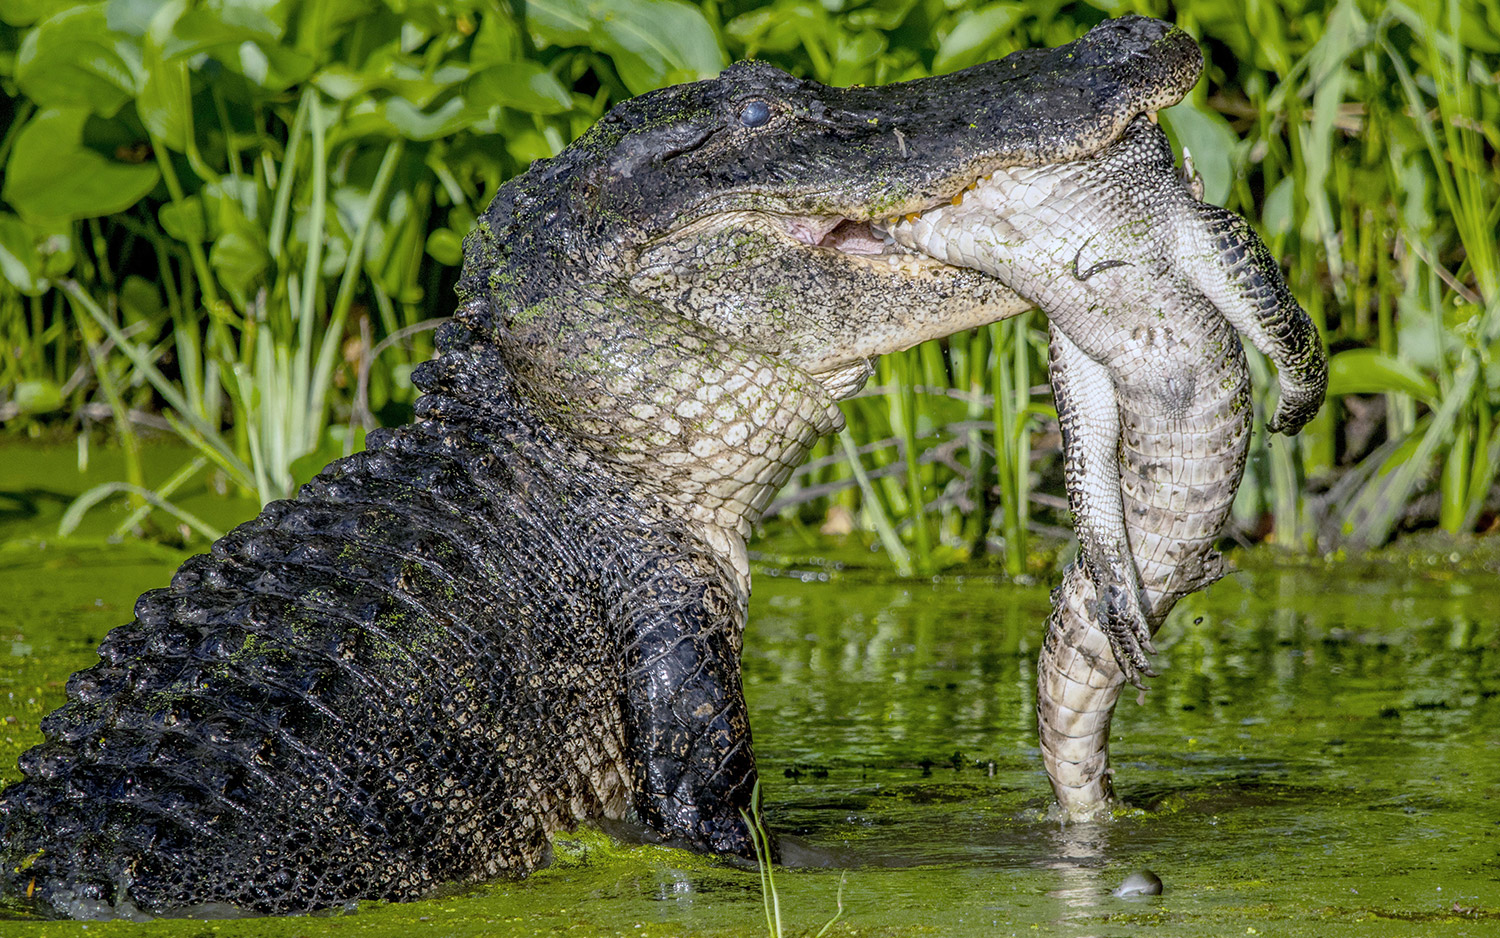 see-an-alligator-devour-another-alligator-in-these-gruesome-photos